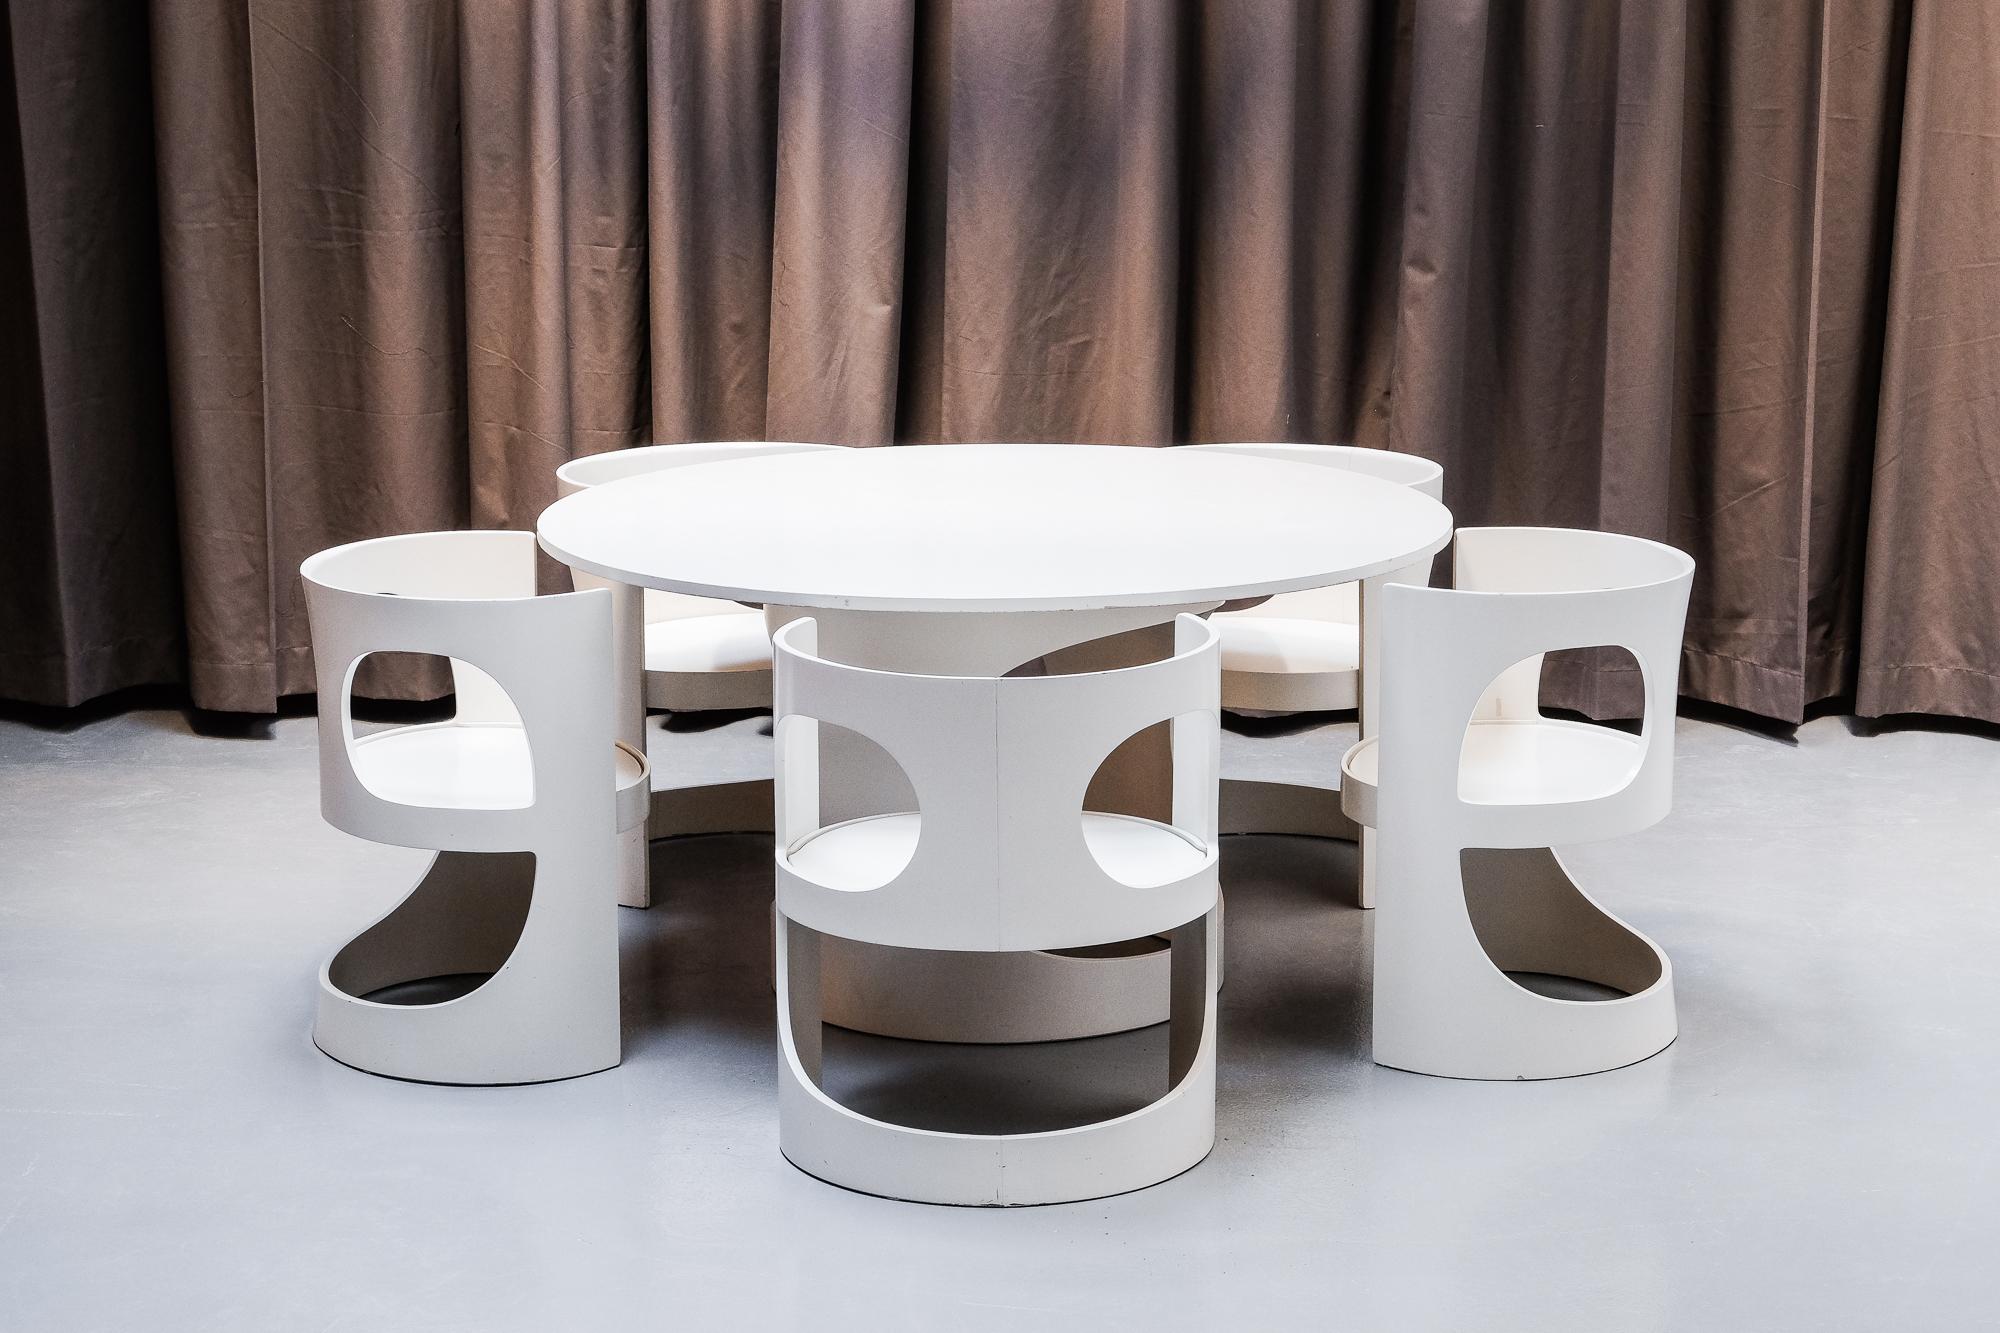 Mid-20th Century Arne Jacobsen White Lacquered Pre Pop Dining Room Set for Asko, 1969